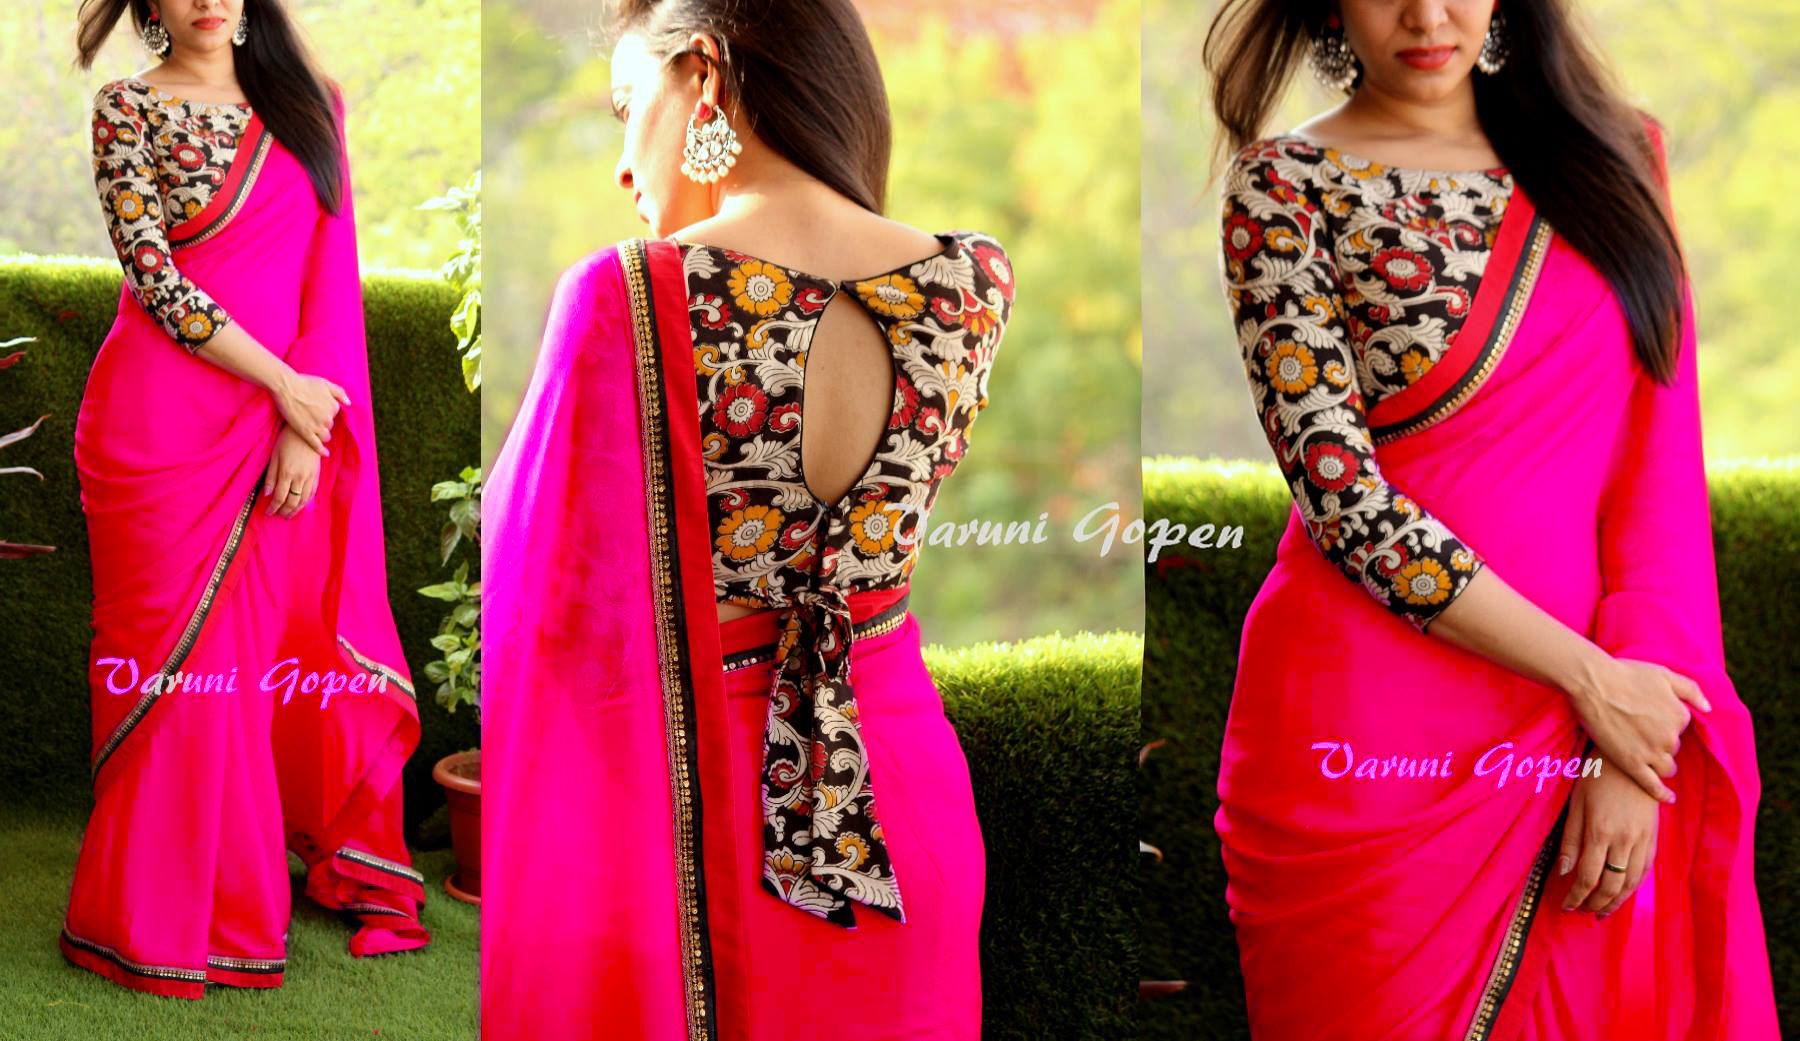 Buy Pink printed georgette saree with blouse Online @ ₹519 from ShopClues